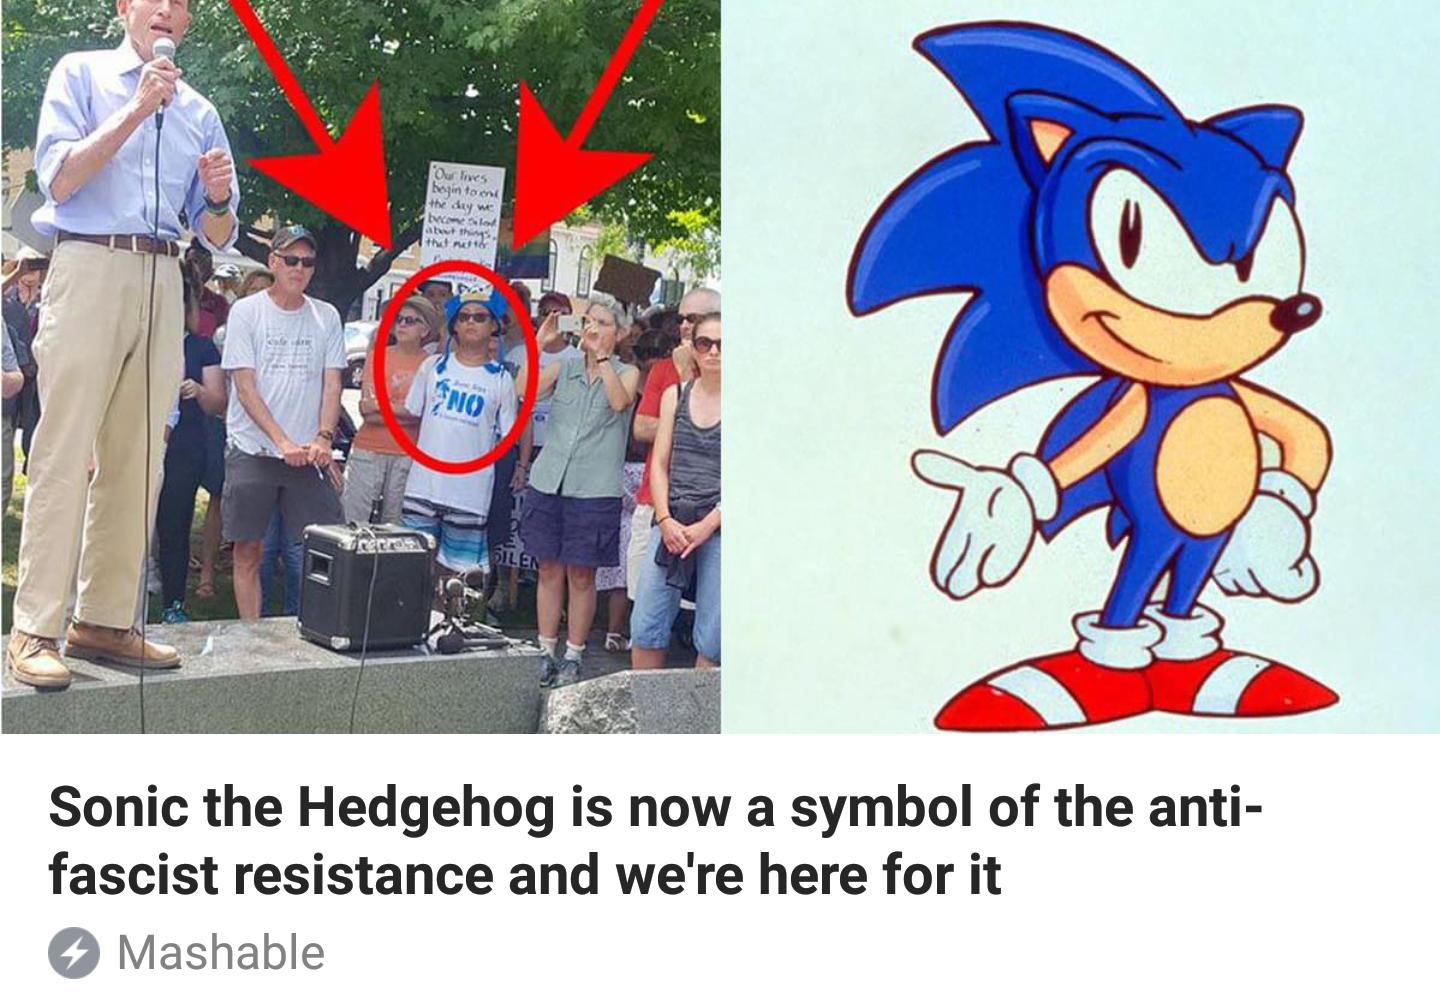 Man at a protest dressed as Sonic the Hedgehog